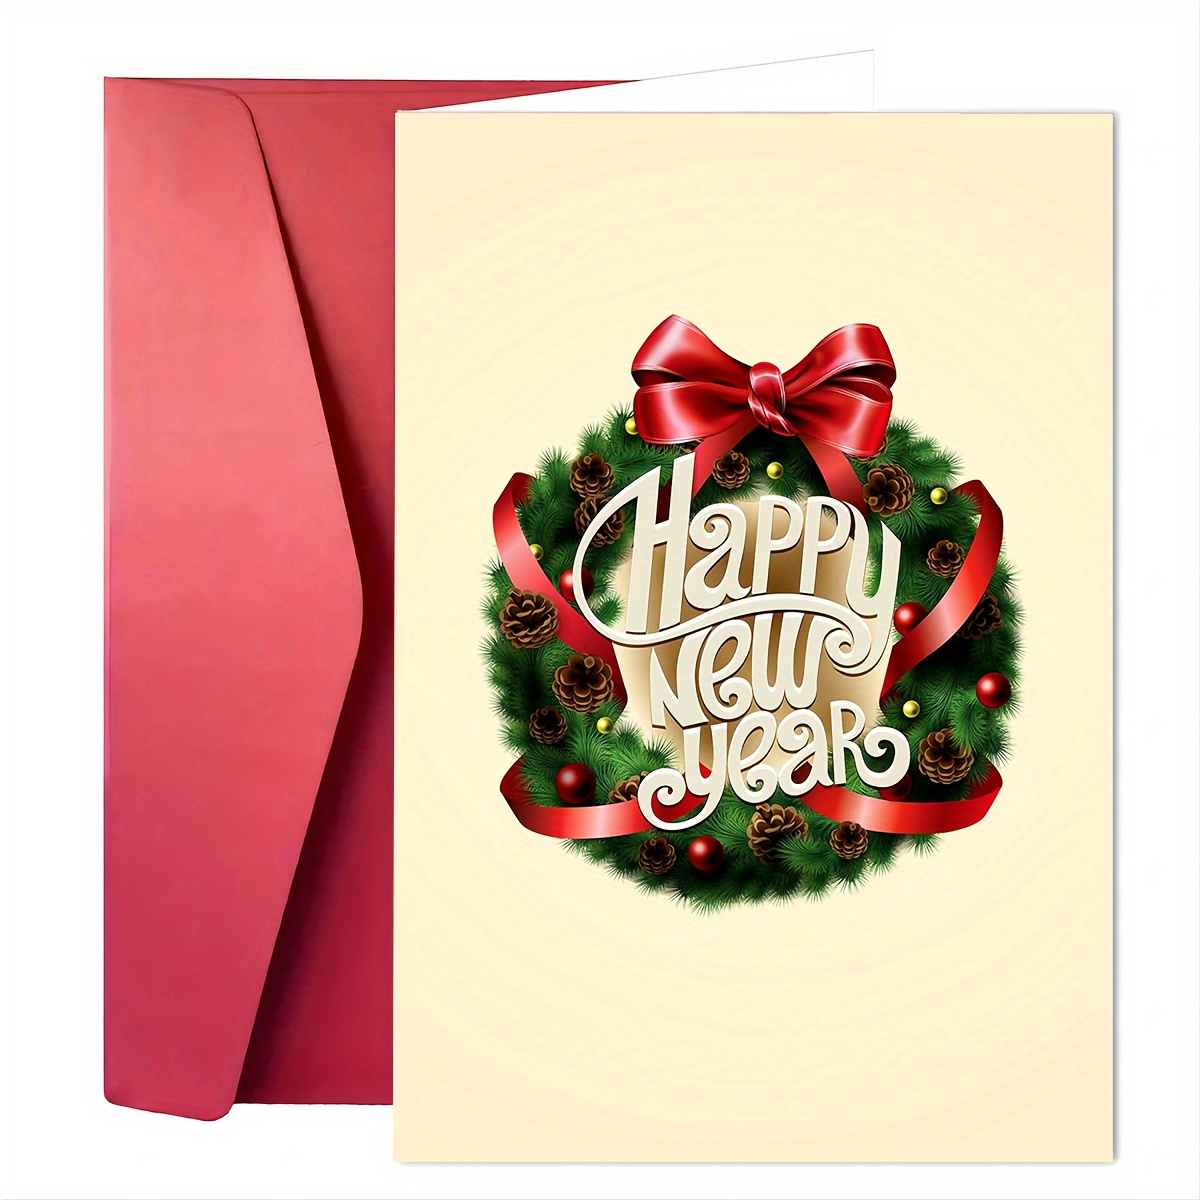 1pc new year cards one jade lane happy new years cards greeting ards blessing gift for family friends and coworkers small business supplies thank you cards new year greeting cards cards blessings and thanks nusual items